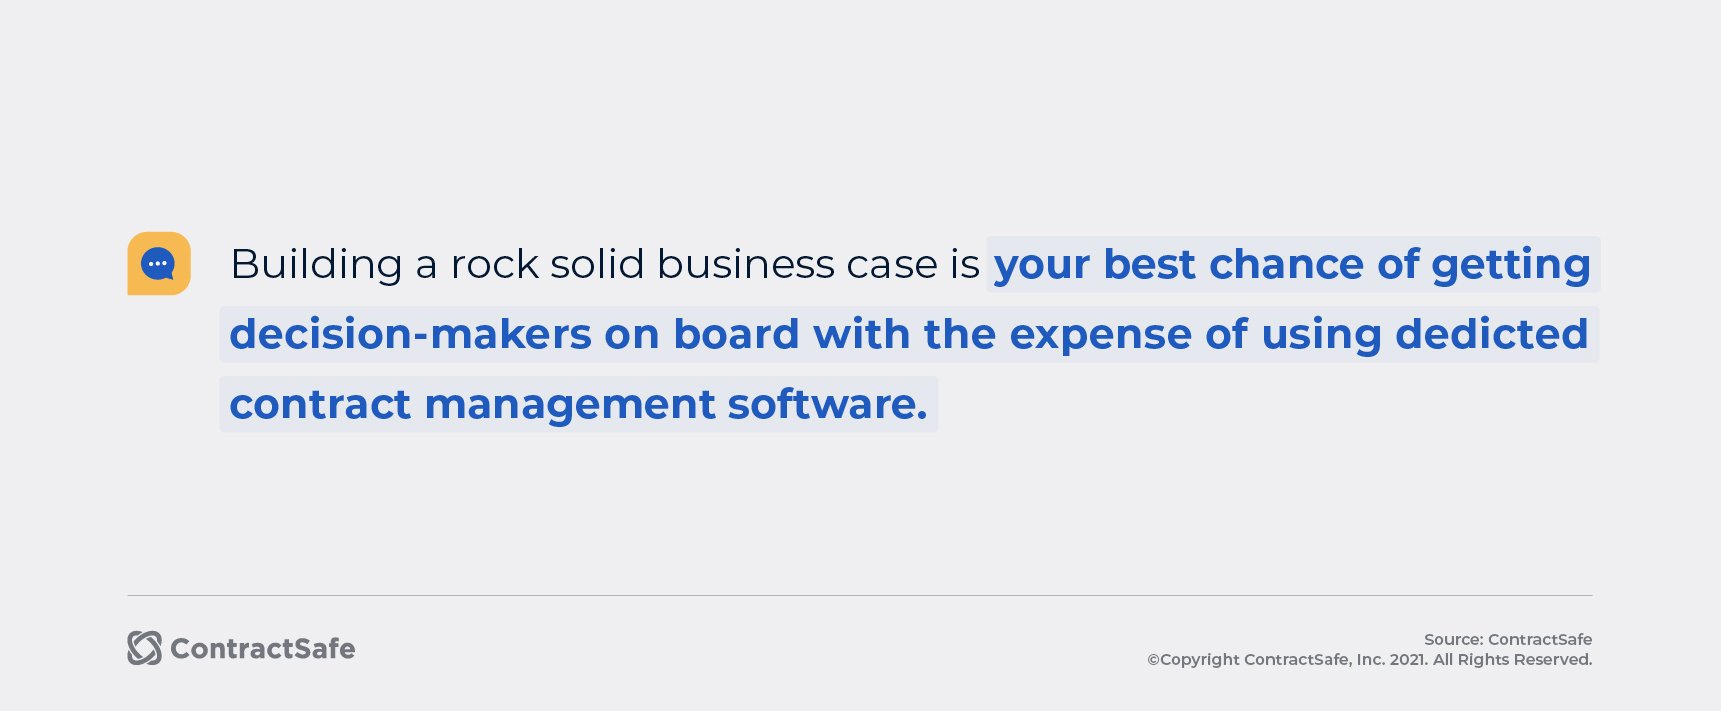 Building a rock solid business case is your best chance of getting decision-makers on board with the expense of using dedicated contract management software. 